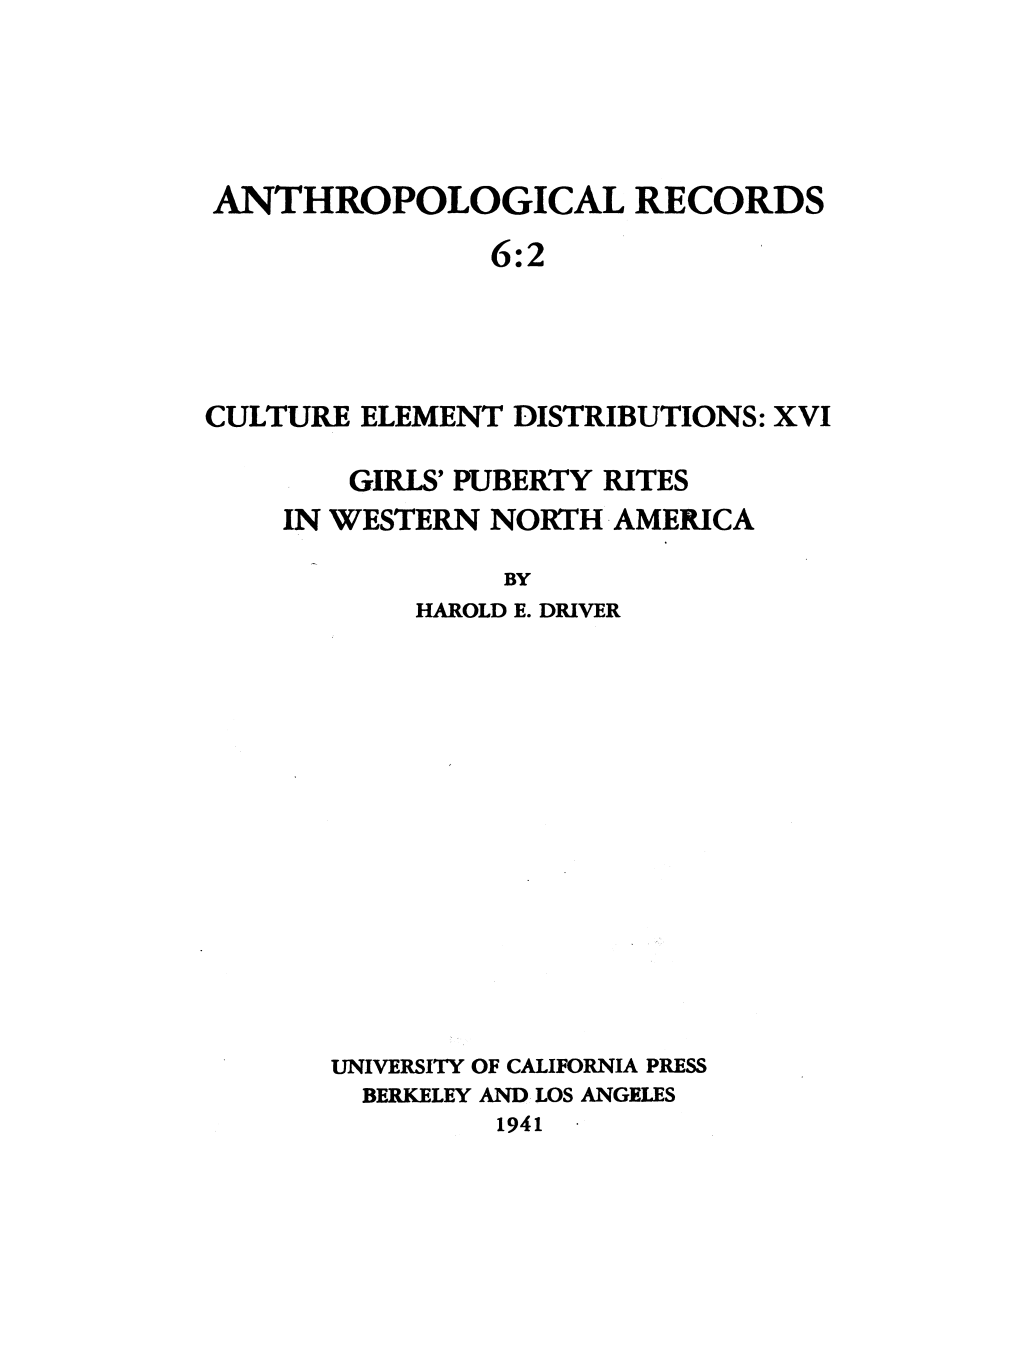 Anthropological Records 6:2